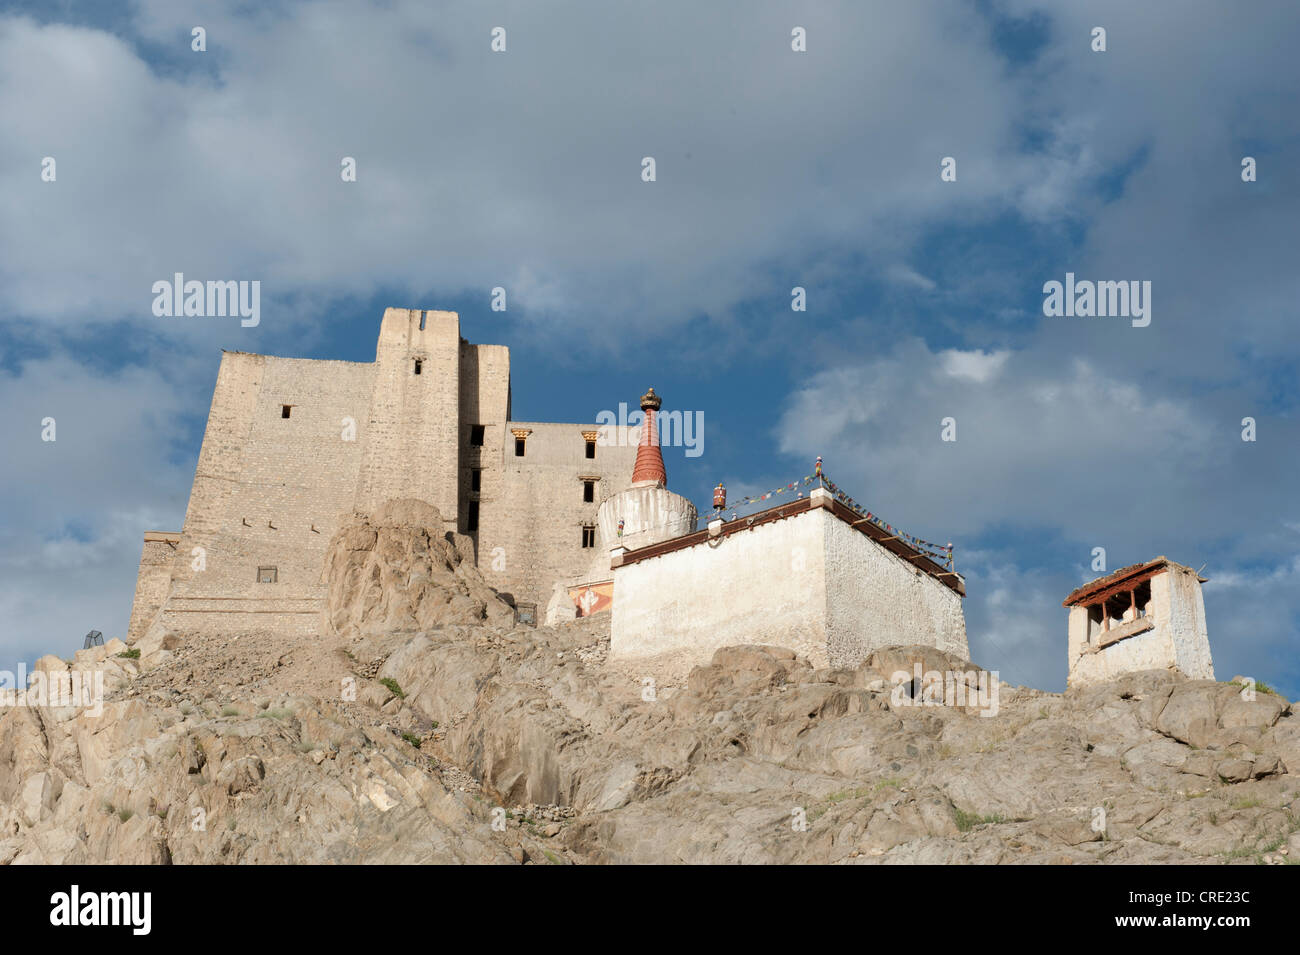 Old Royal Palace, Castle of Leh, ancient walls, Ladakh district, Jammu and Kashmir, India, South Asia, Asia Stock Photo